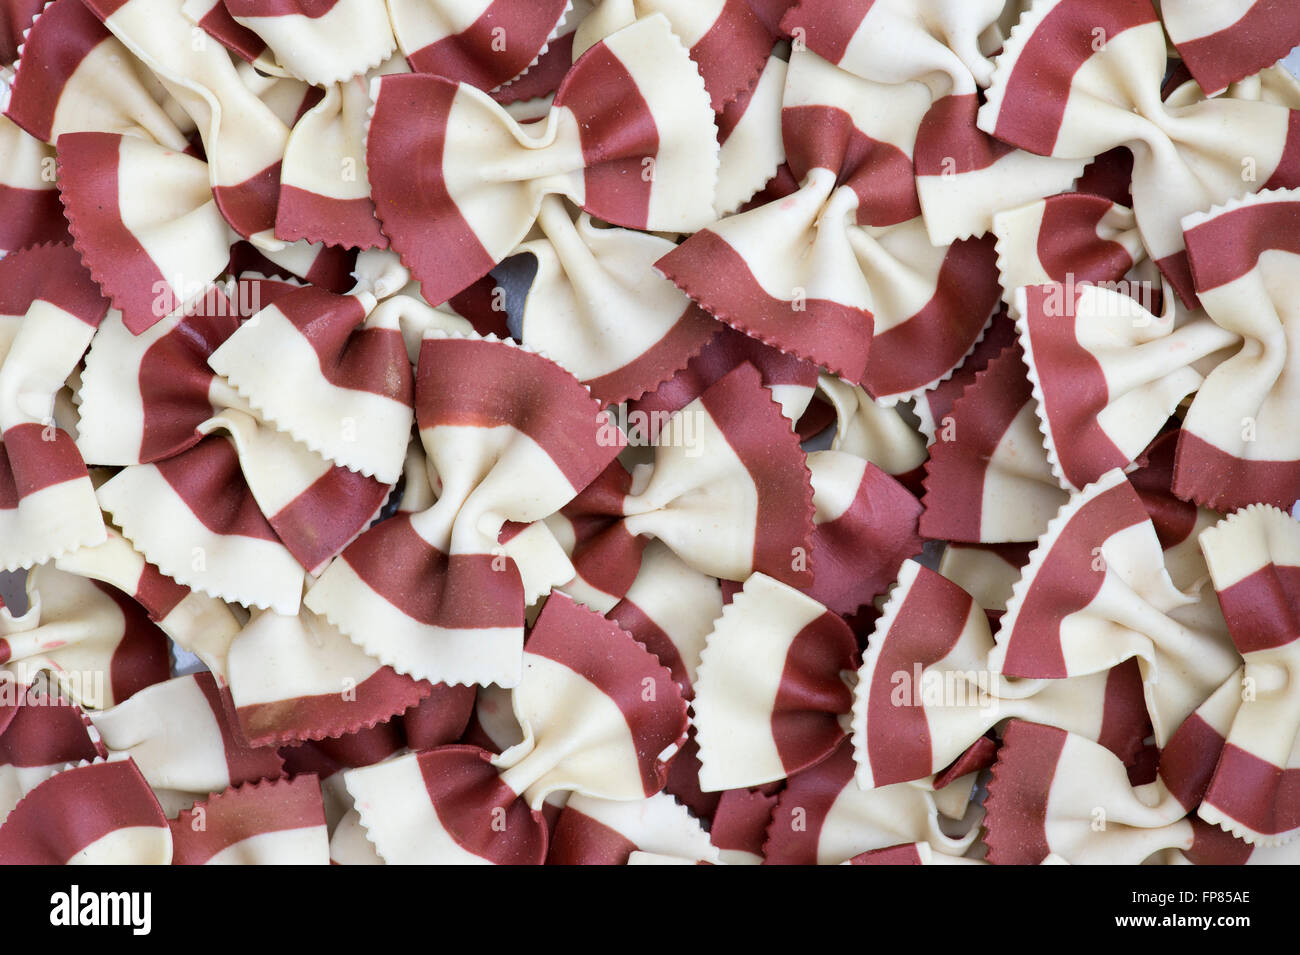 Butterfly Fantasia Red & White. Farfalle pasta. Flavored coloured Pasta. Specialty pasta Stock Photo